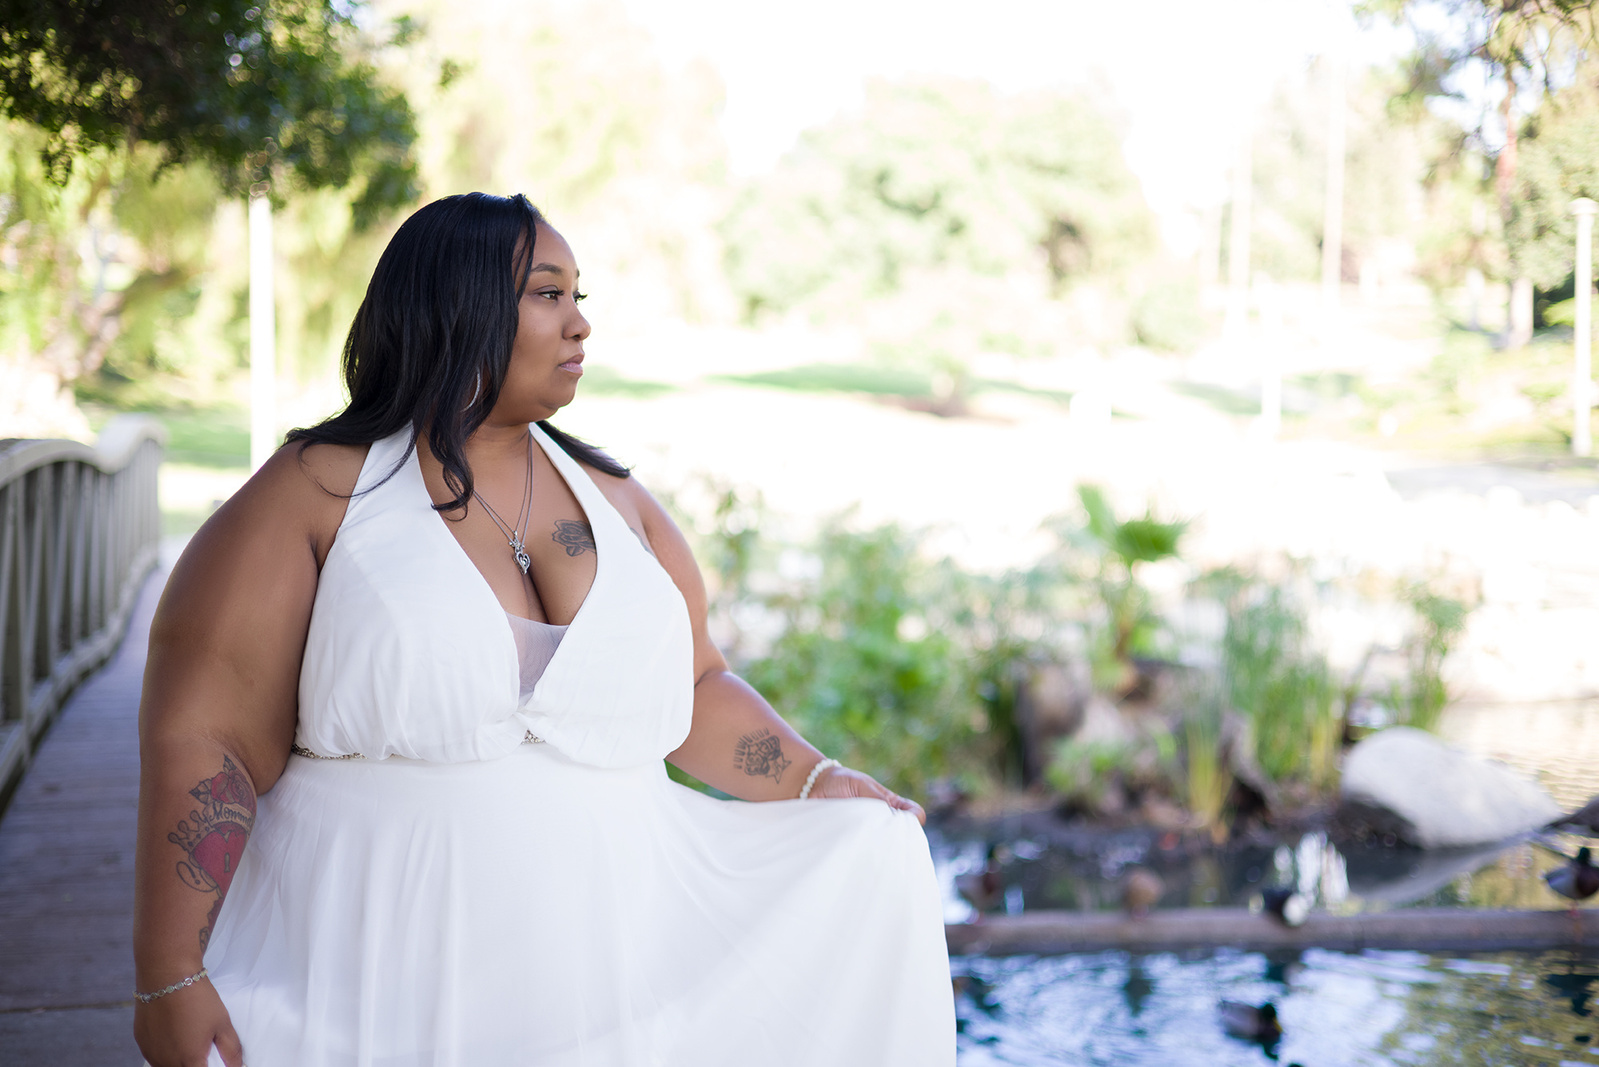 An outdoor individual portrait of a curvy black woman in a white dress looking over water in Eisenhower Park, CA